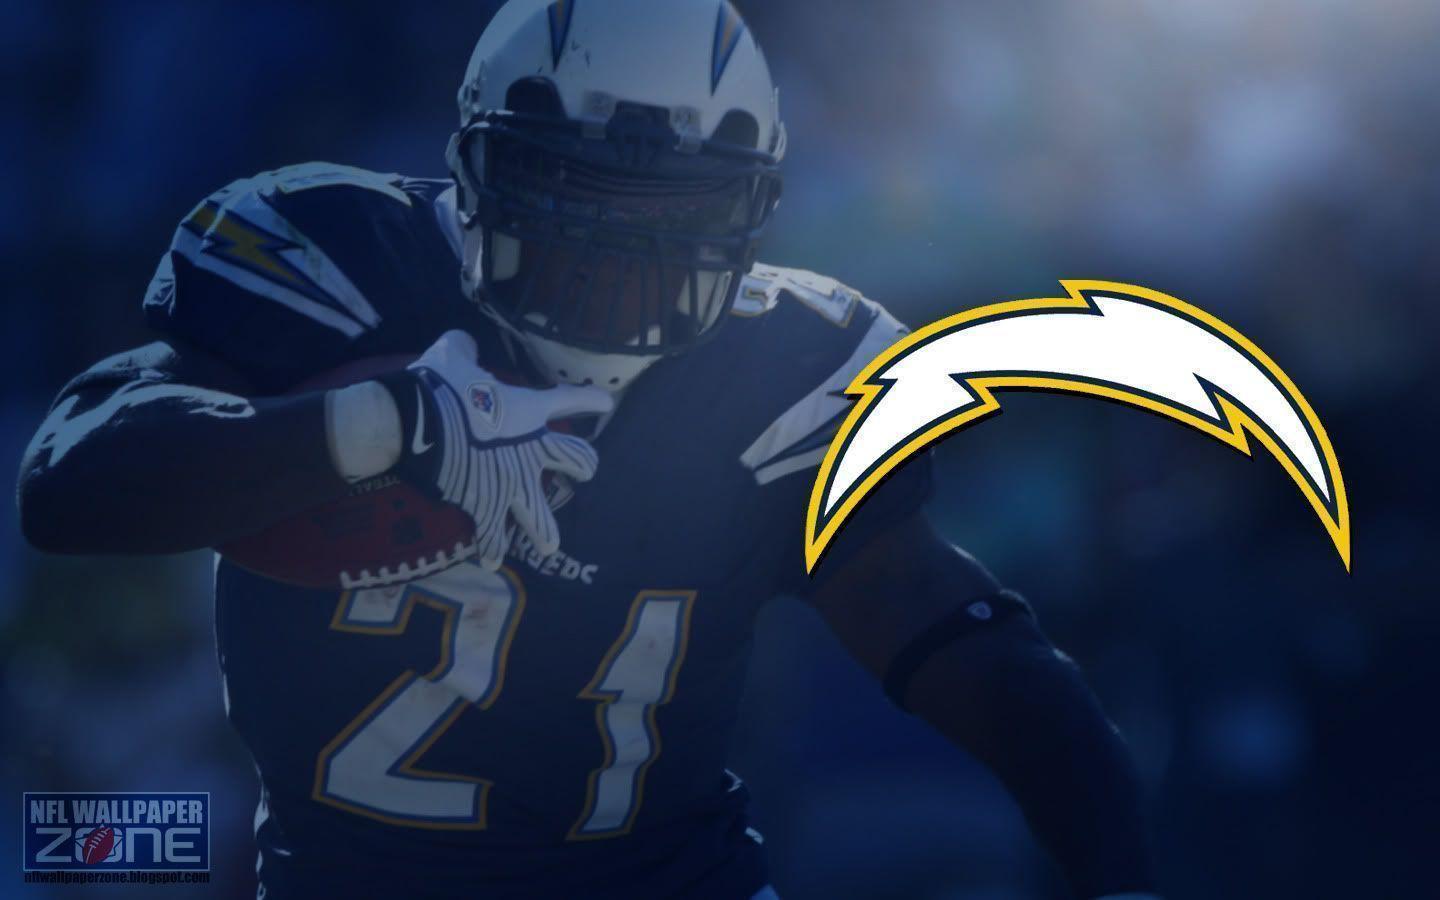 NFL Wallpapers Zone: San Diego Chargers Wallpapers / Desktop